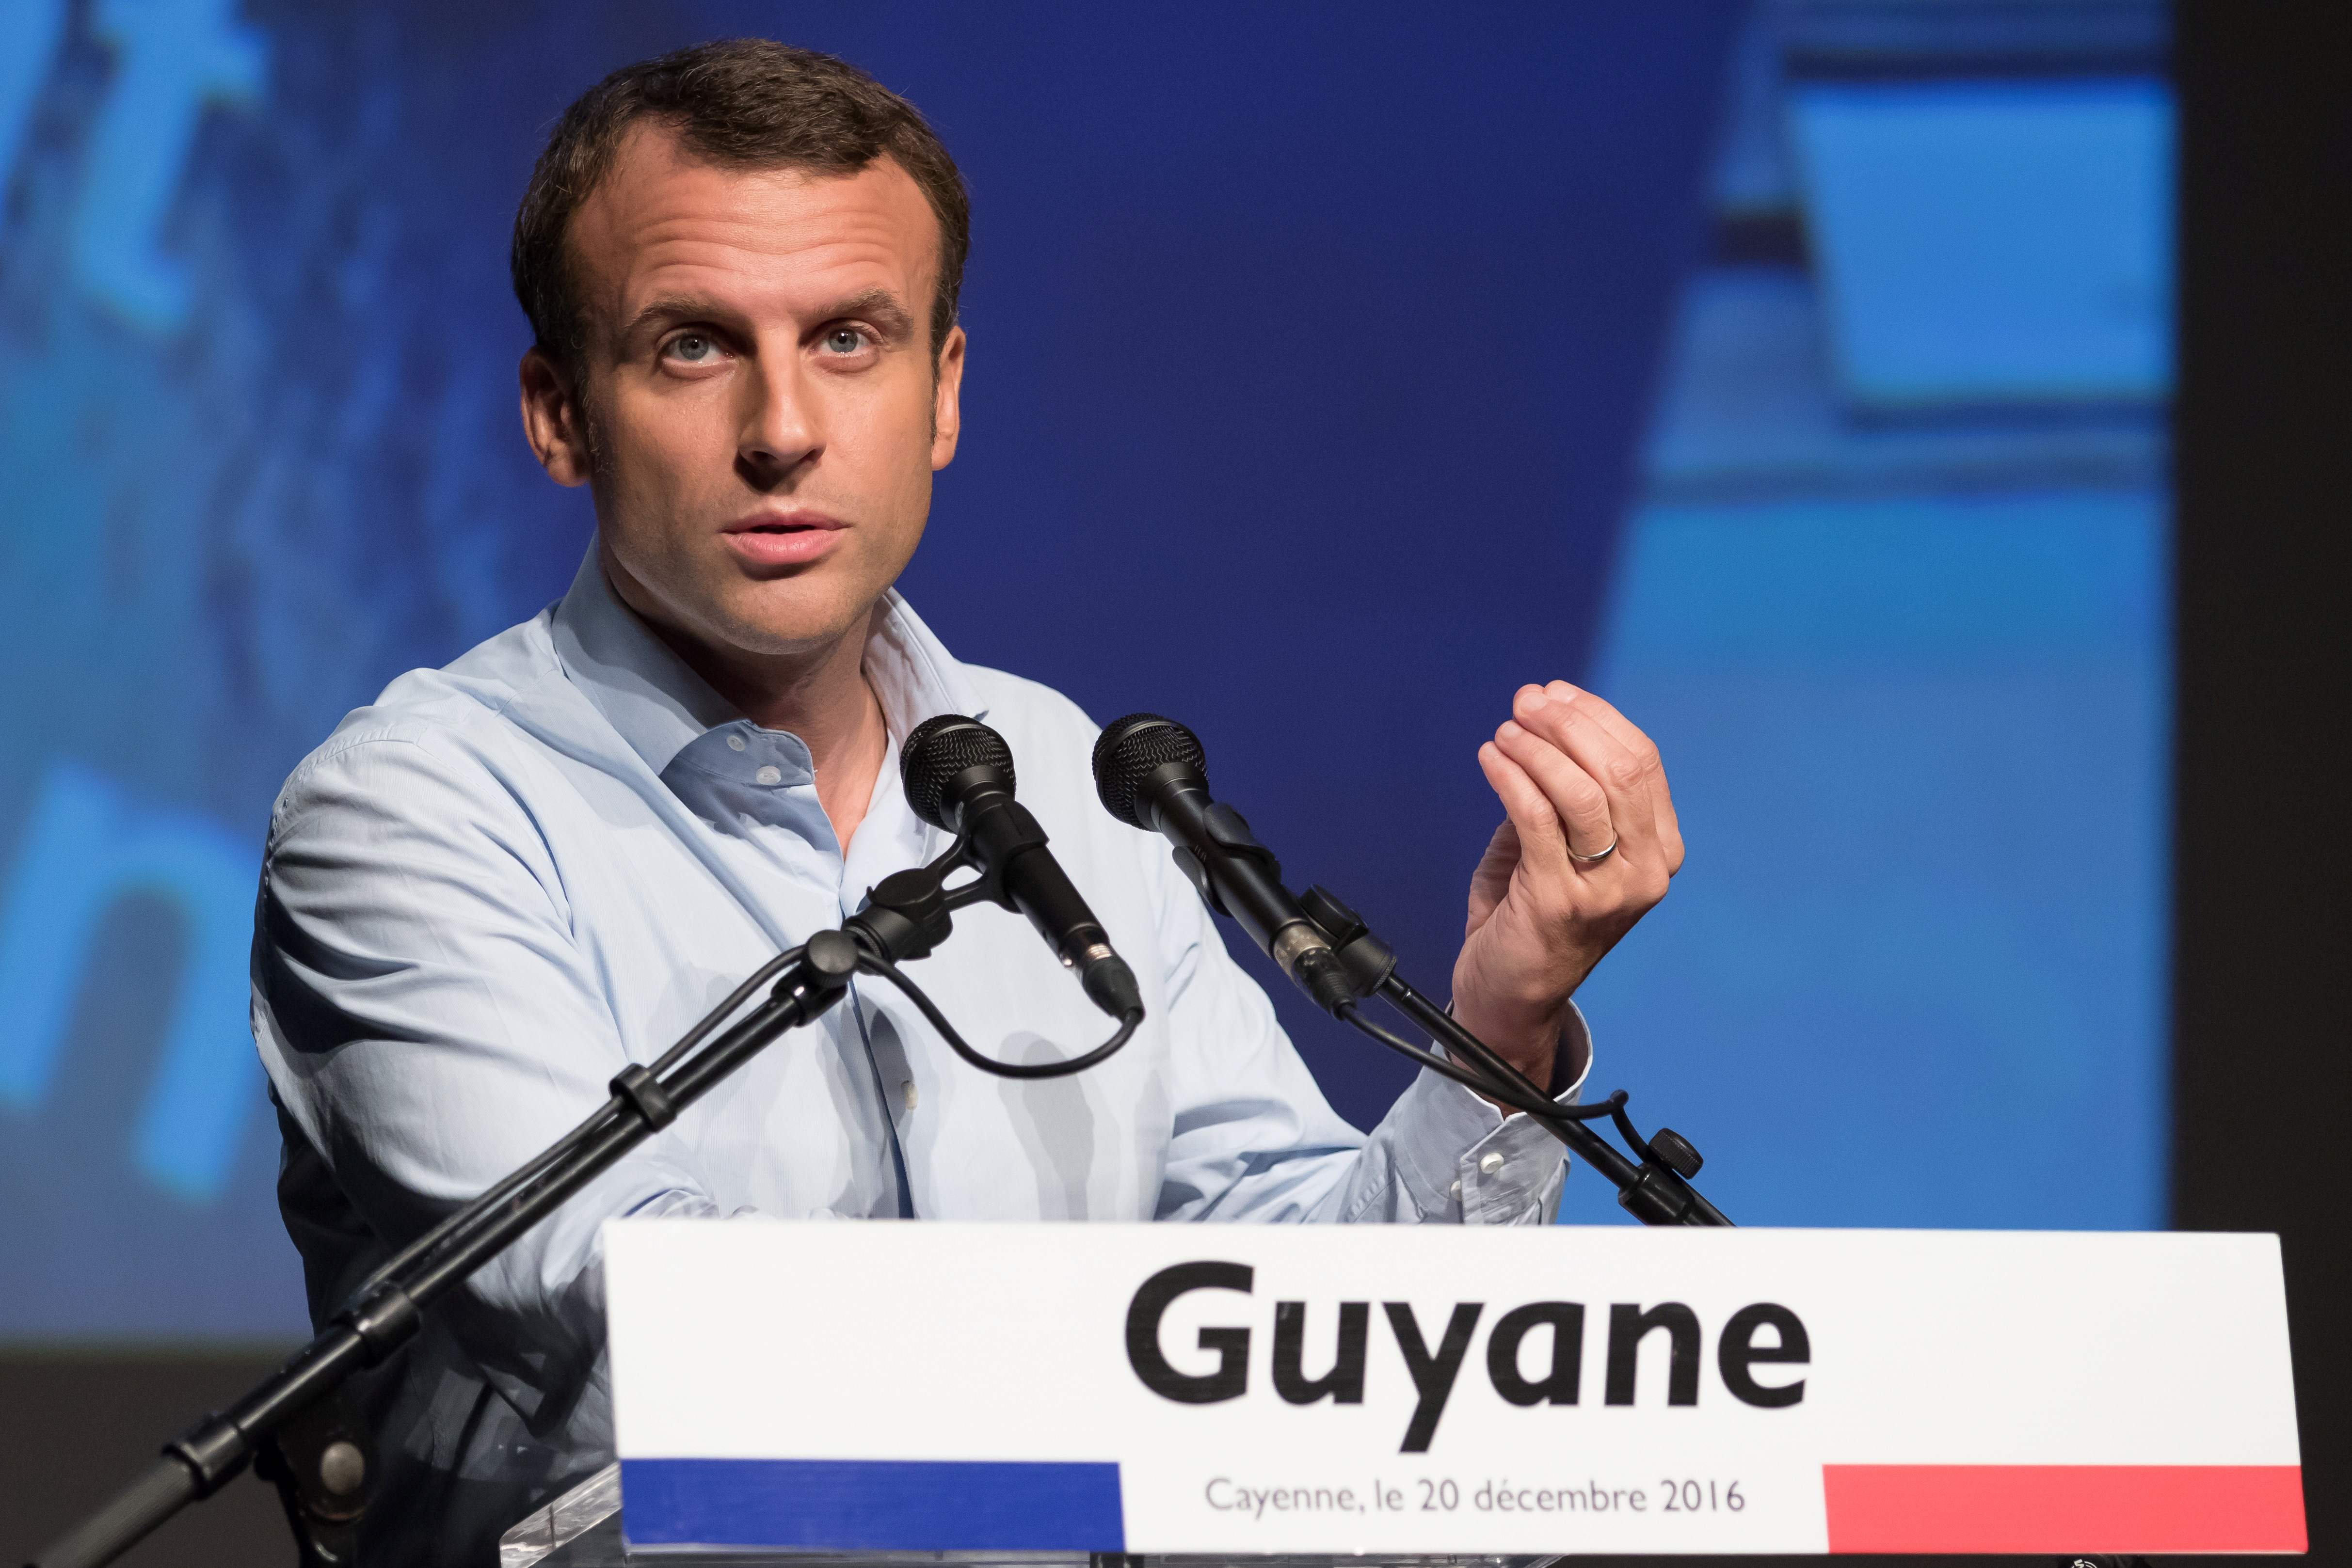 Does the French Socialist primary matter?